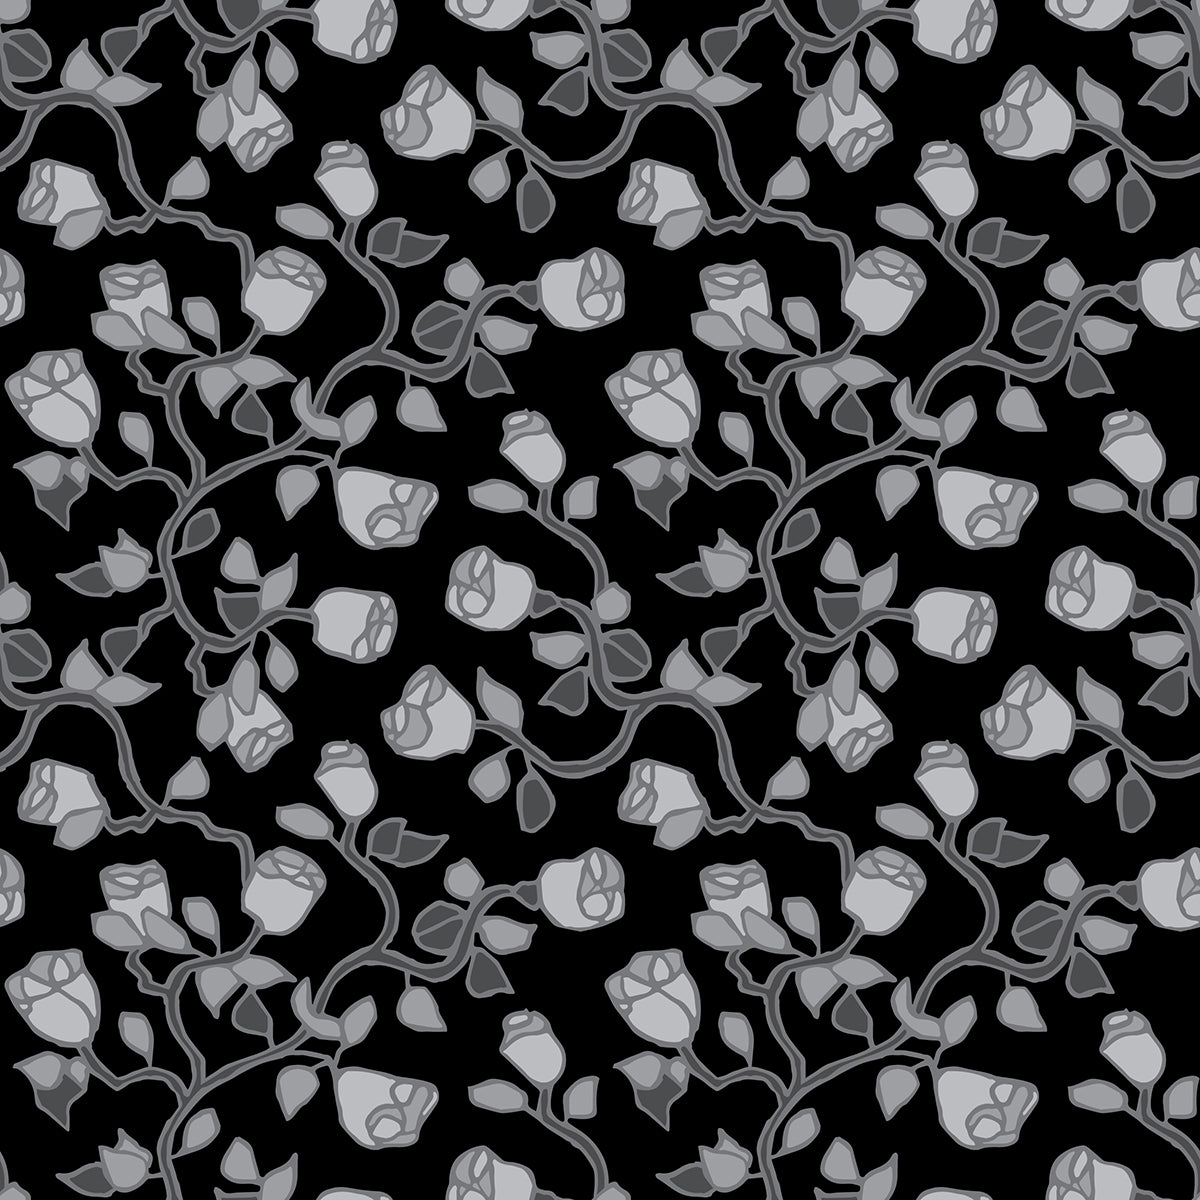 Beach Rose Shadow features a repeating pattern in black and gray colors of organic, hand-drawn rose vines.